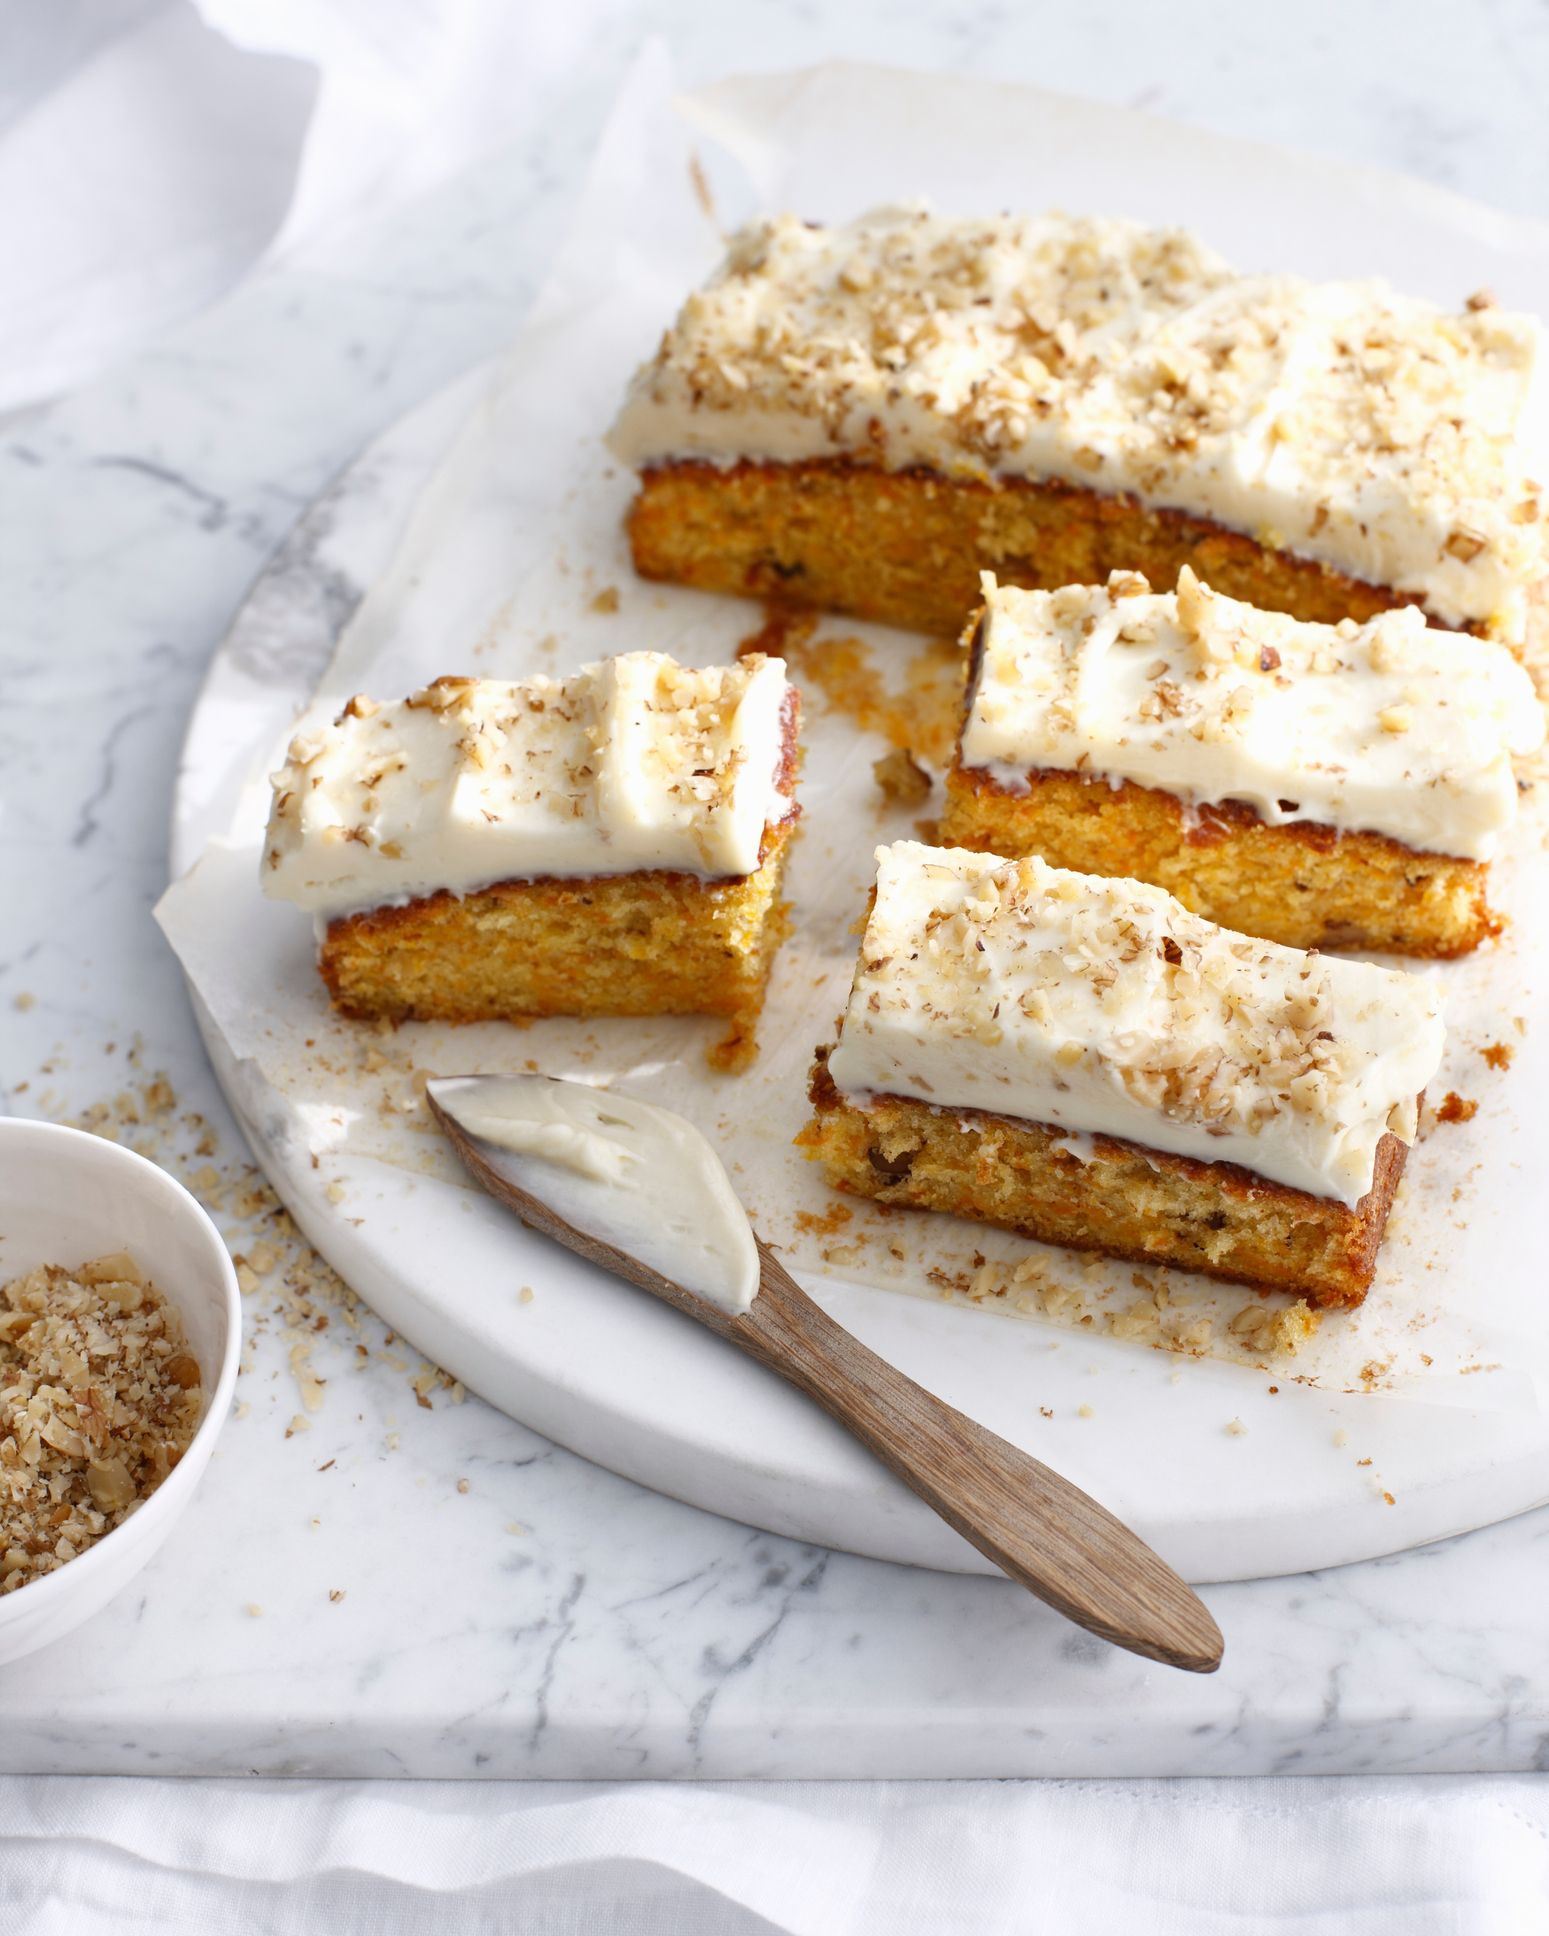 Carrot Cake • The Answer is Cake